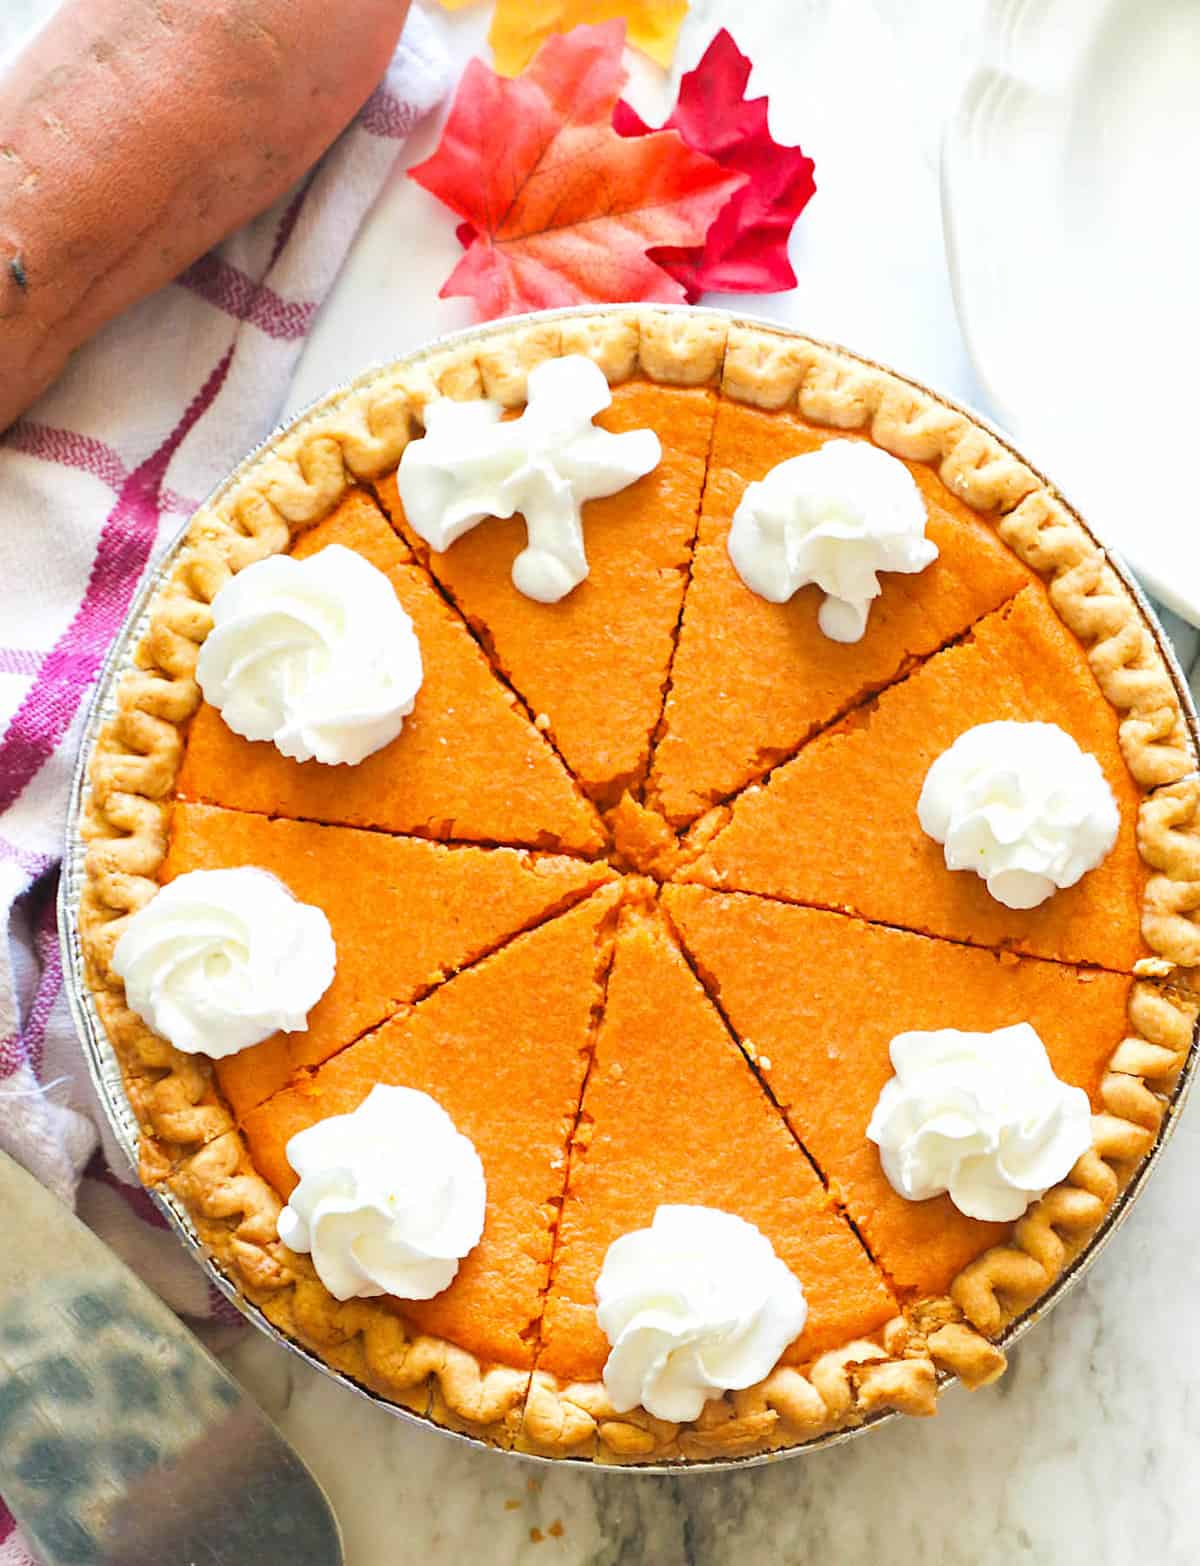 Soul food sweet potato pie with whipped cream